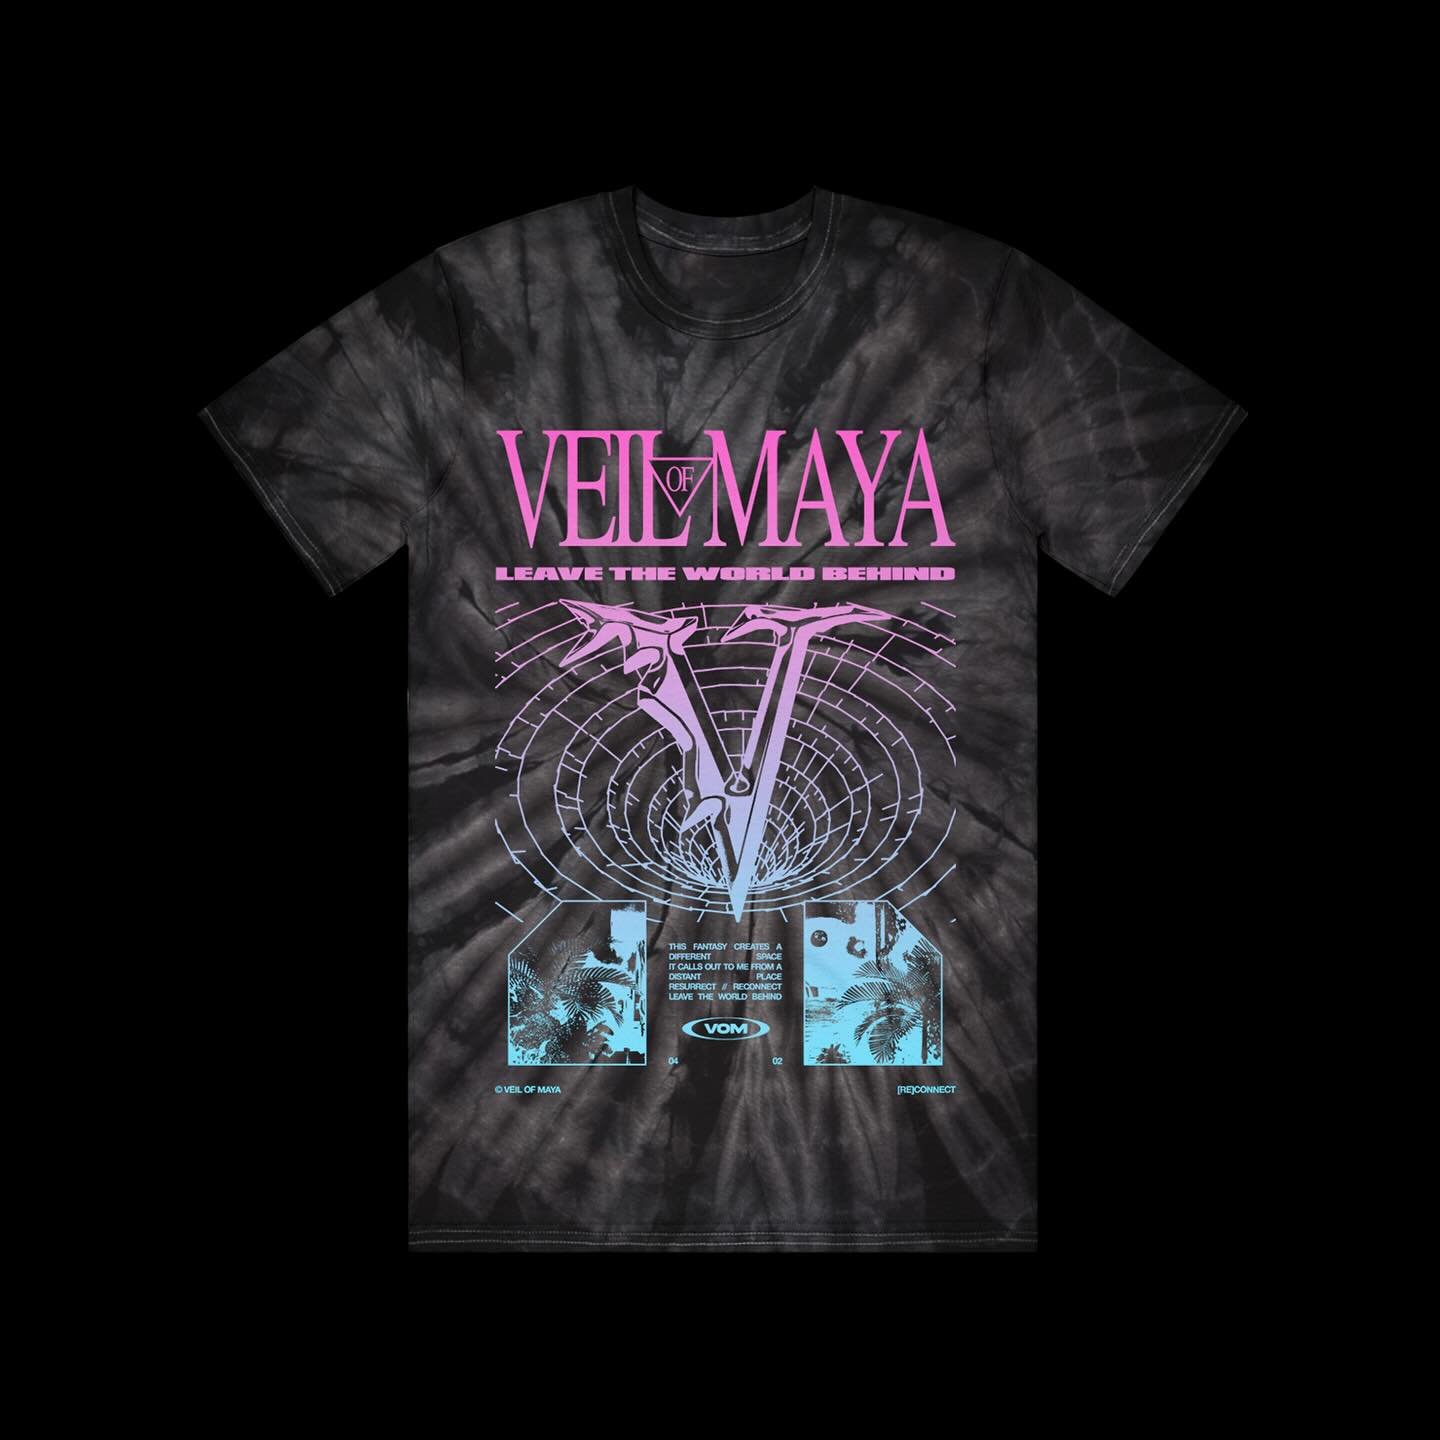 [RE]CONNECT / @veilofmayaofficial 

New tee for Veil Of Maya, available on tour now. Adding a gradient is such simple yet fun way to add a little interest to your design! 

For project inquiries, please email hello@leannawhite.com
-
#art #design #gra